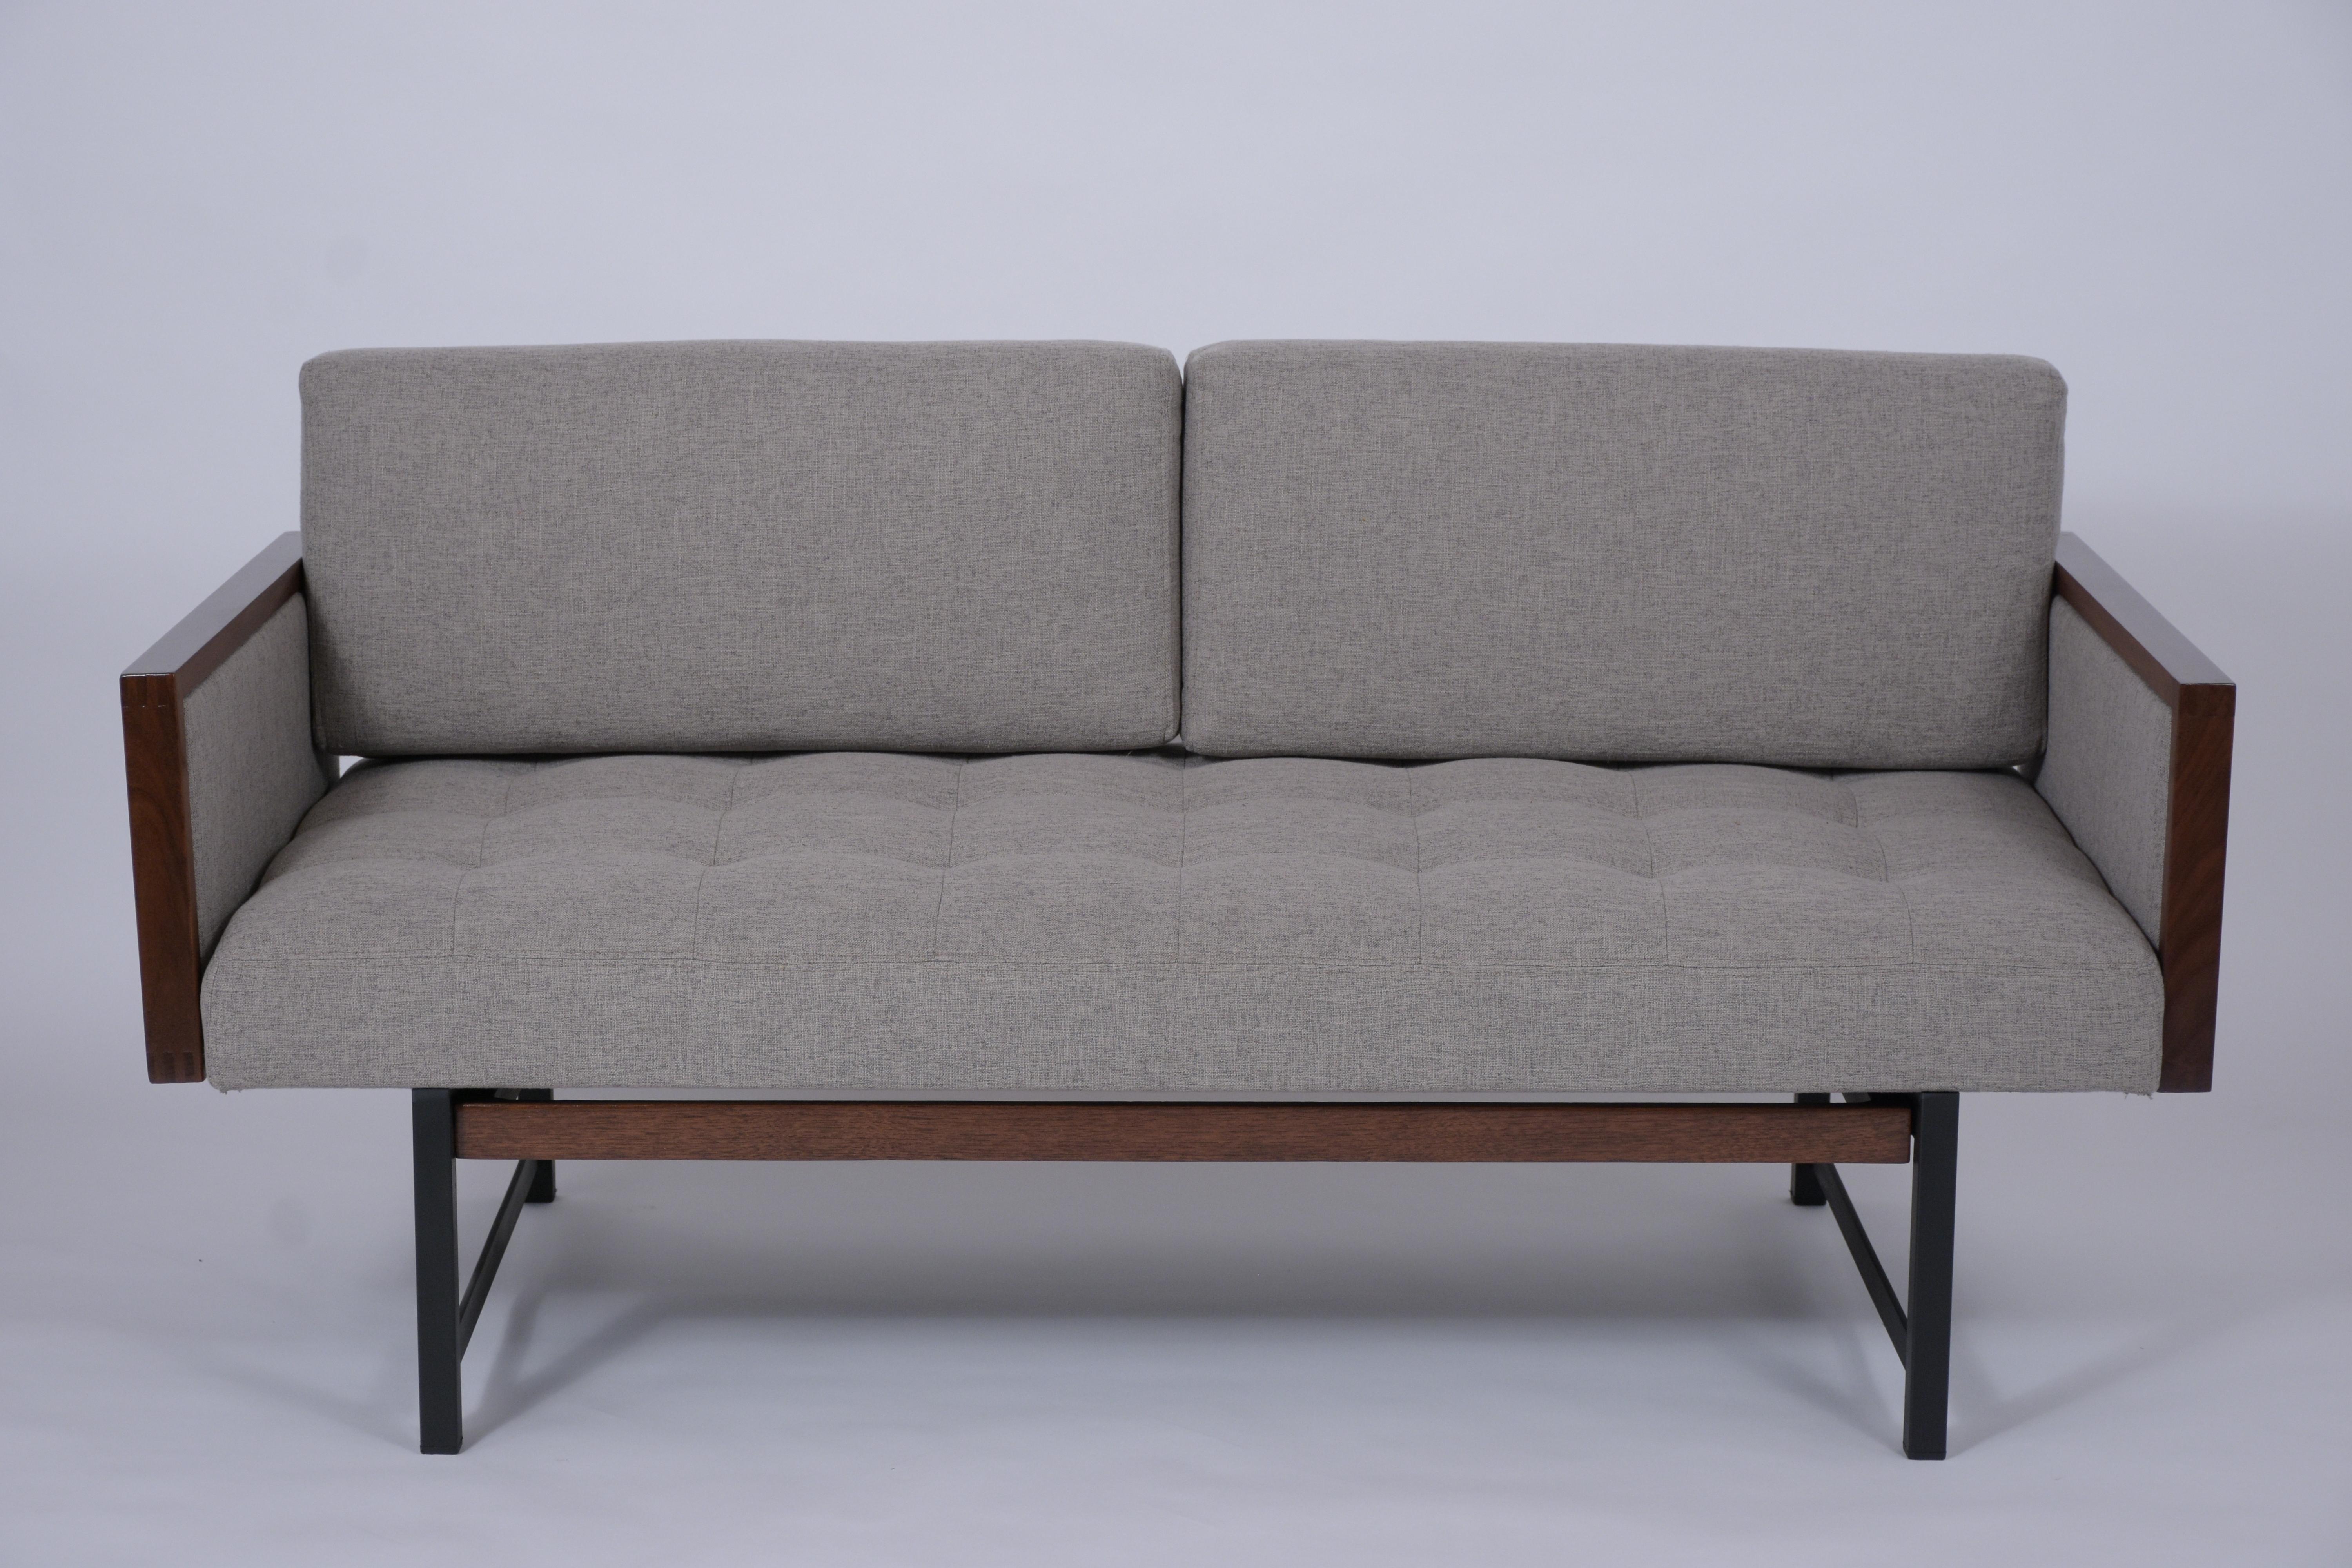 Hand-Crafted Vintage Modern Tufted Sofa